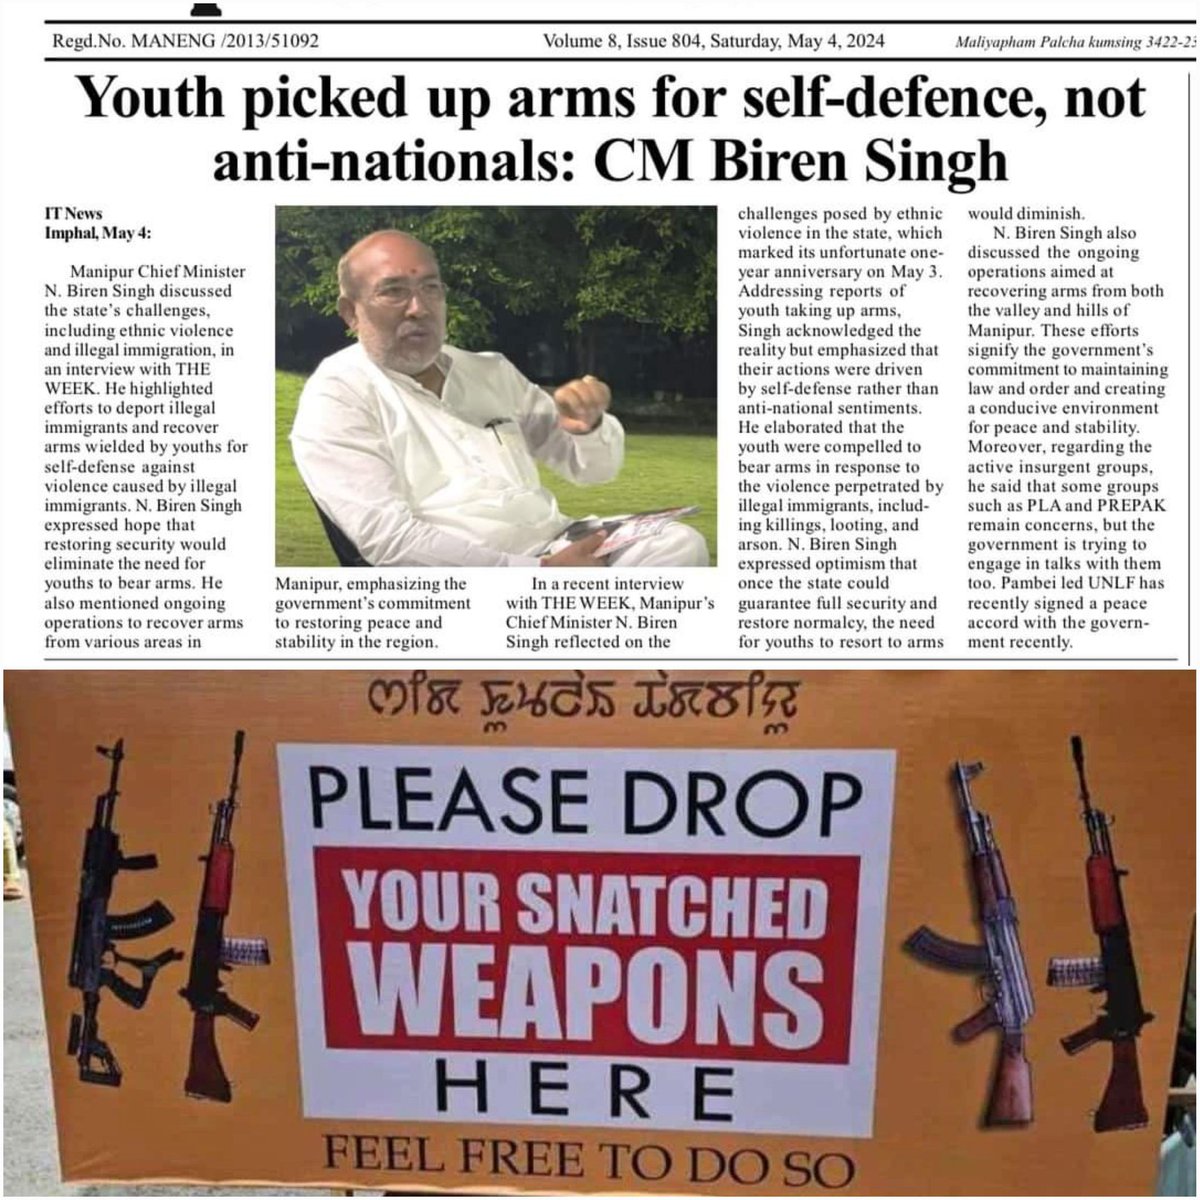 For those wondering why #ManipurViolence persist unabated even after a year, here is what CM Biren Singh has to say about #MeiteiMilitants in Imphal Valley roaming freely with thousands of weapons looted from state armoury. And he is also the state's home minister!